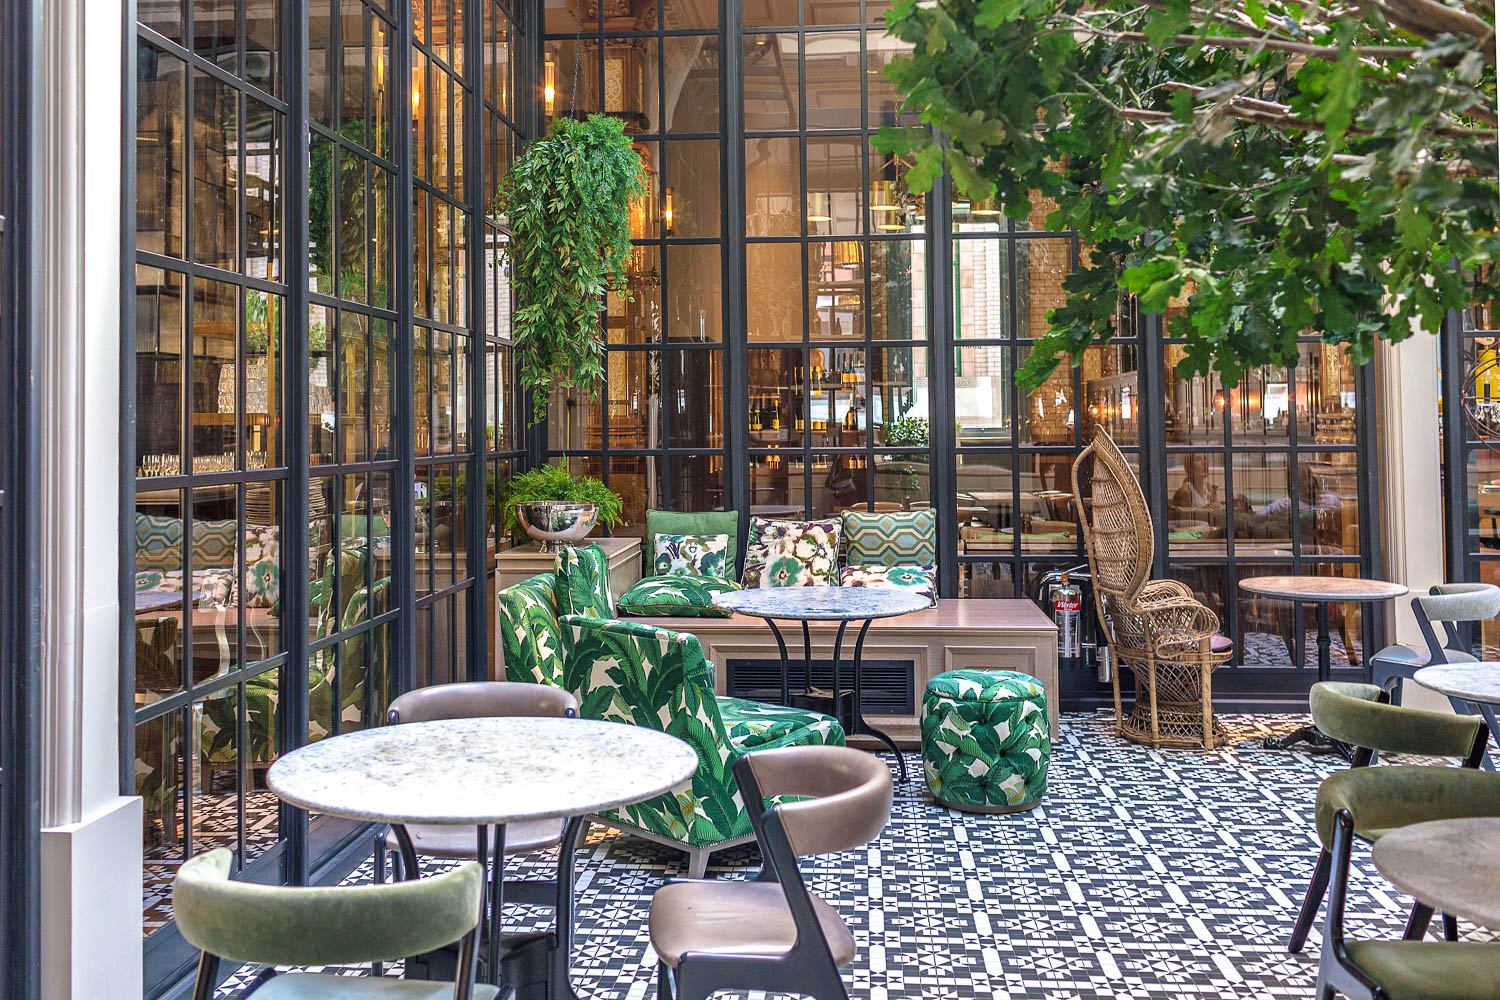 The most Instagrammable spot in Manchester? The winter garden room at the Refuge inside the Principal Manchester